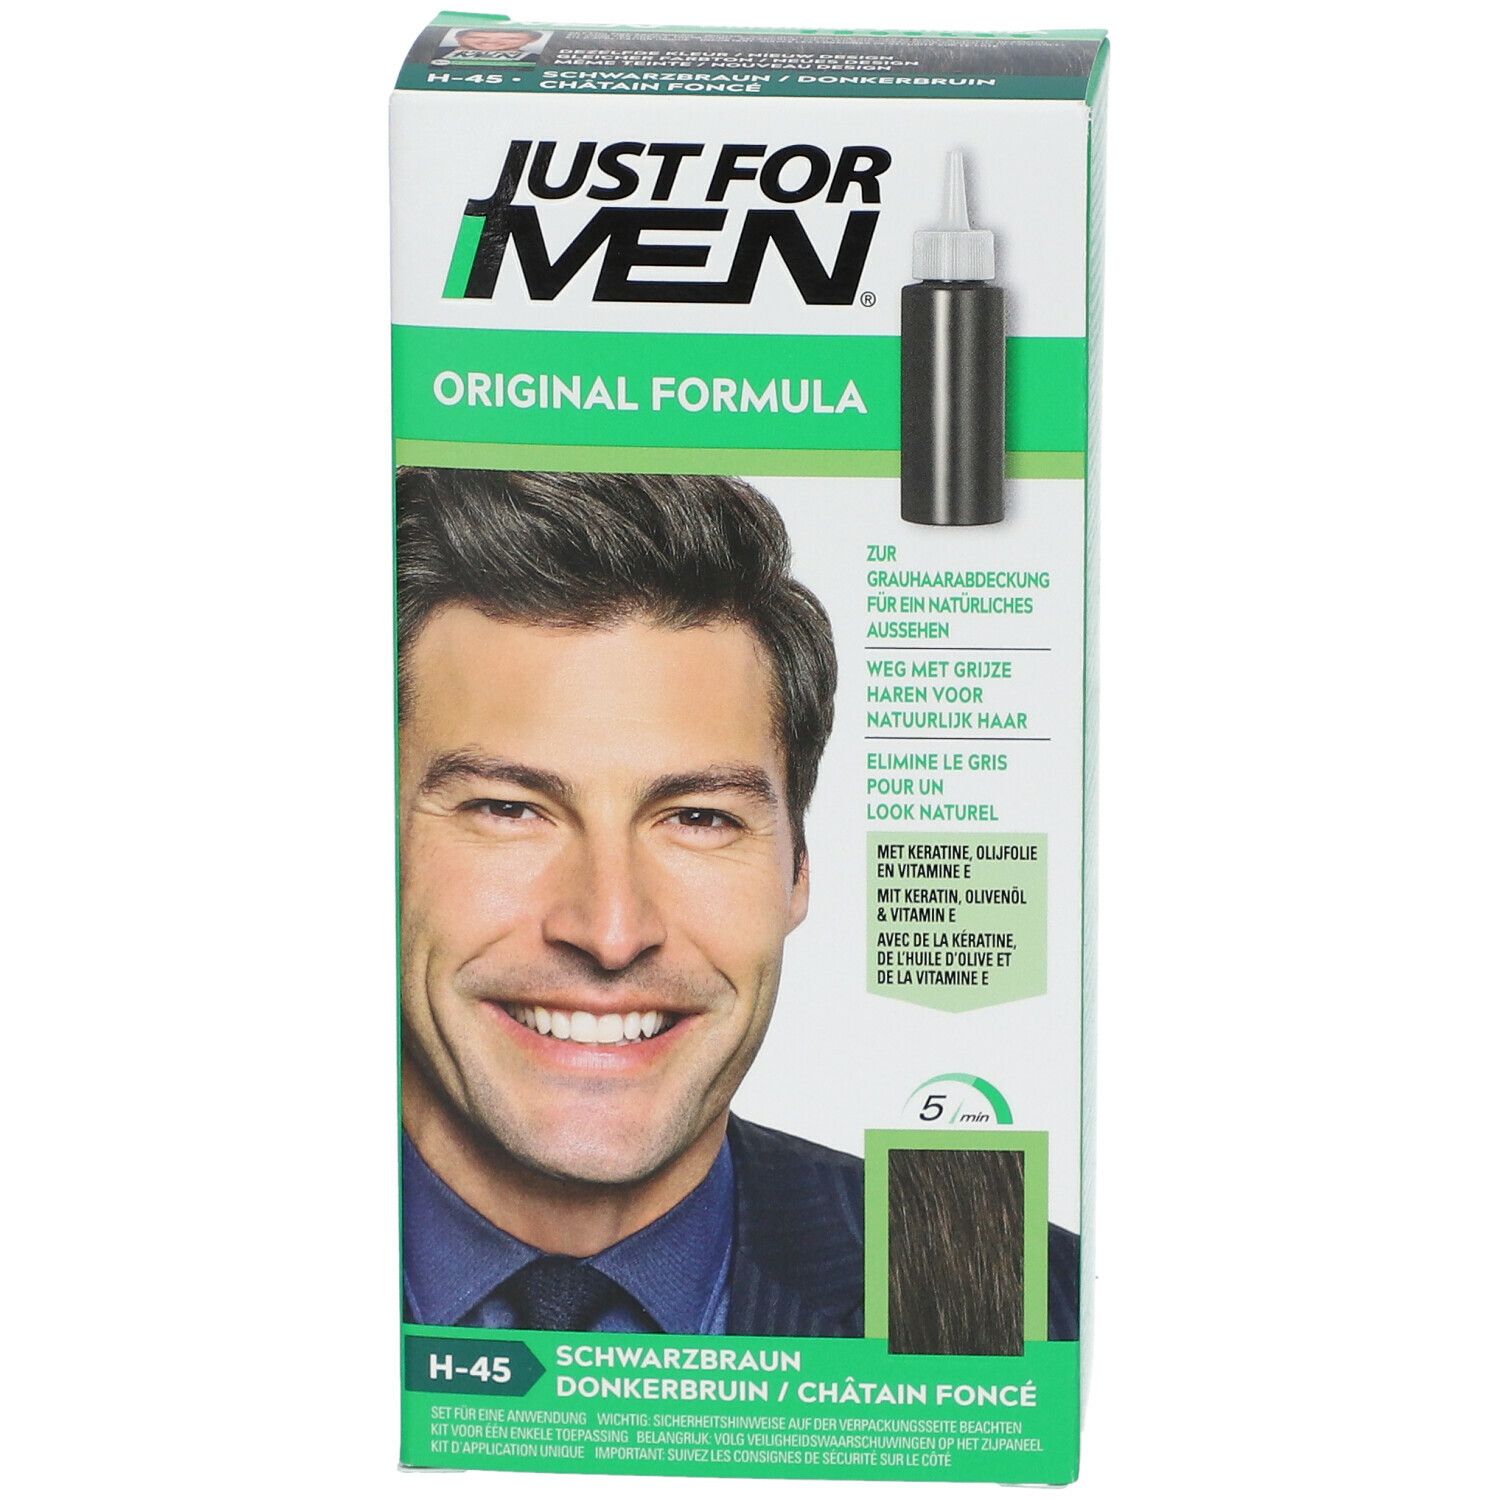 JUST FOR MEN Shampooing Colorant Brun moyen